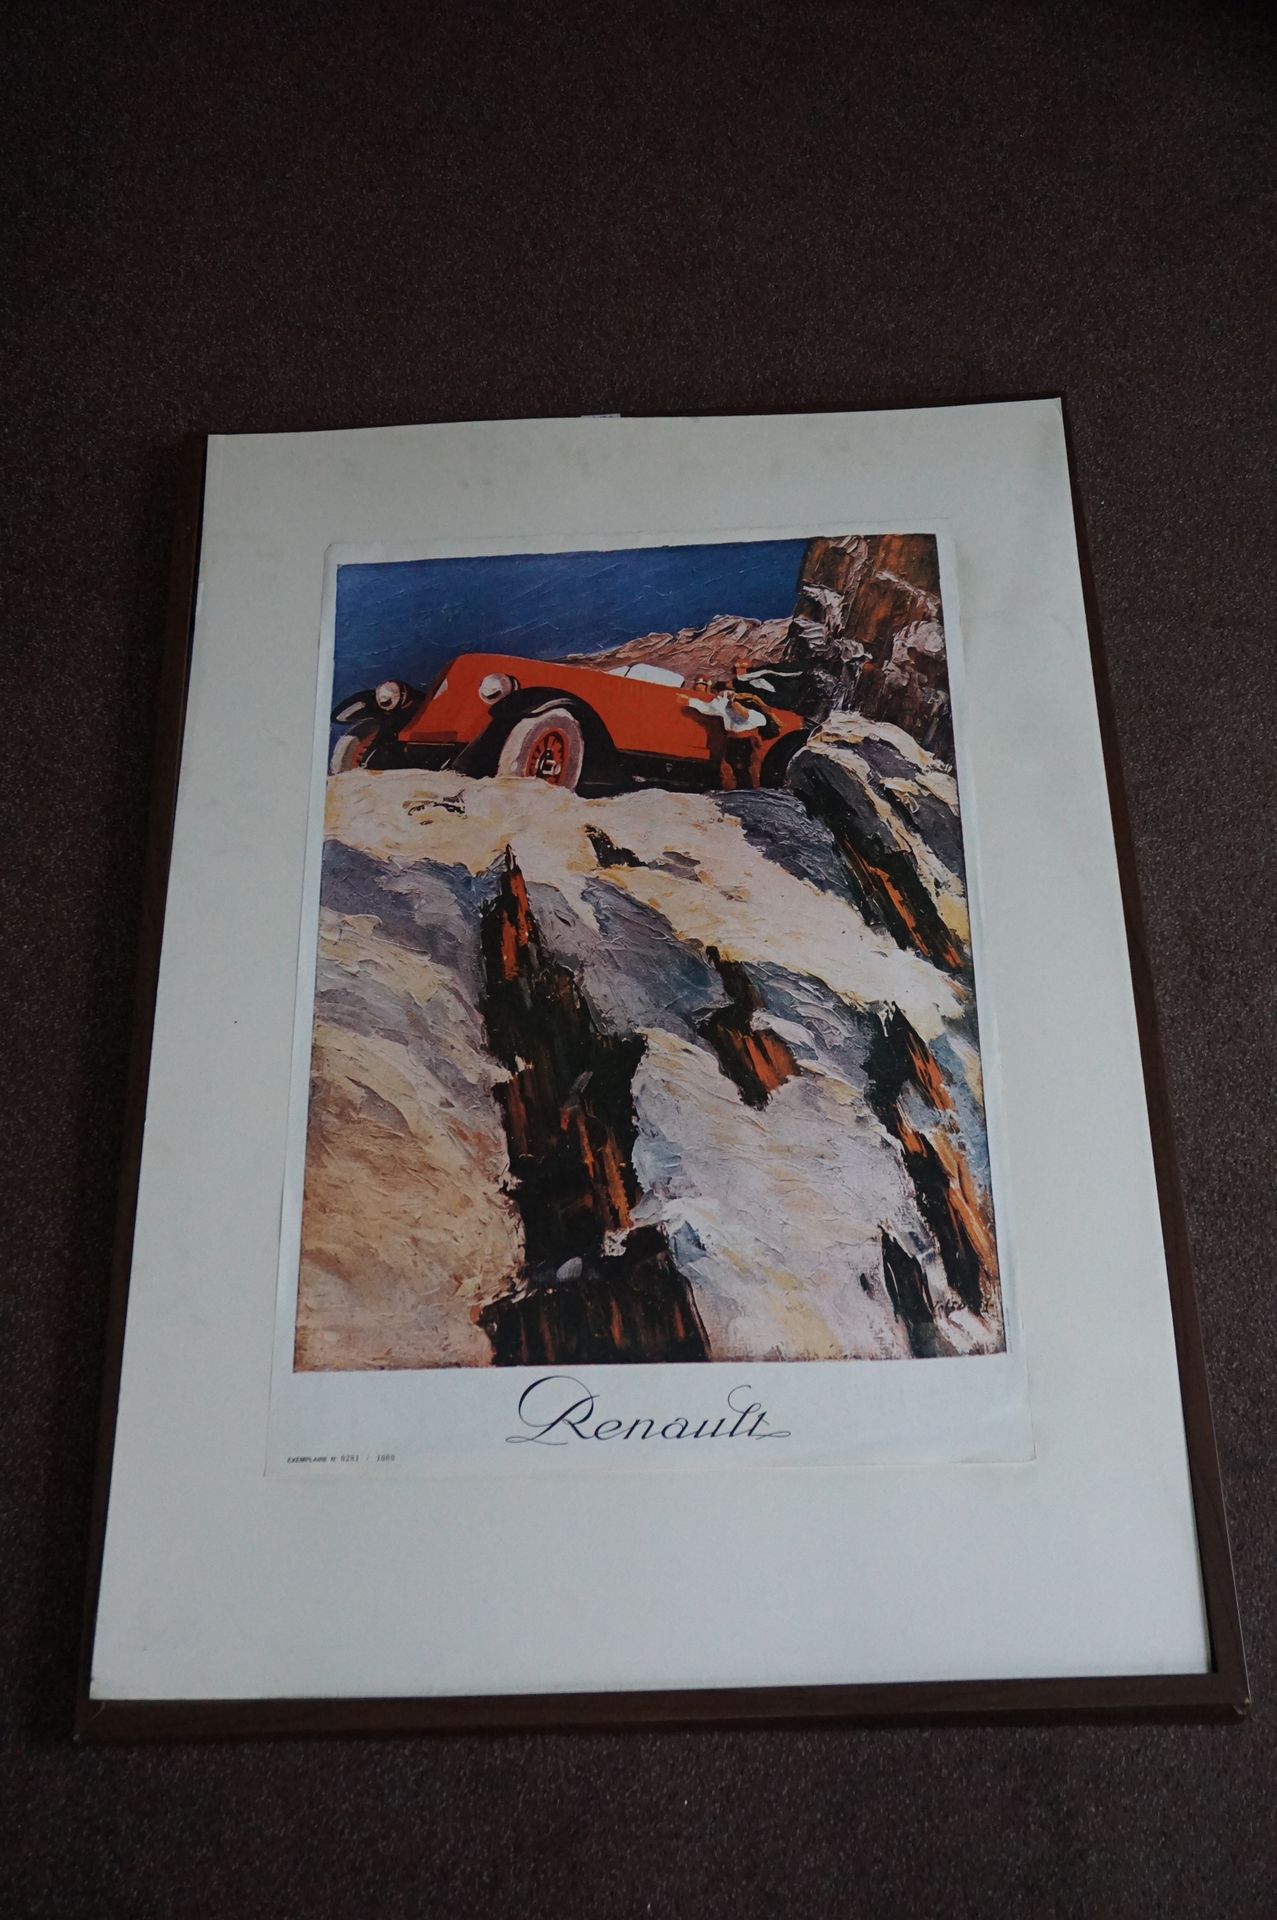 Null Renault poster with a painting. Copy n° 281 / 1000
With frame 
100 x 70 cm